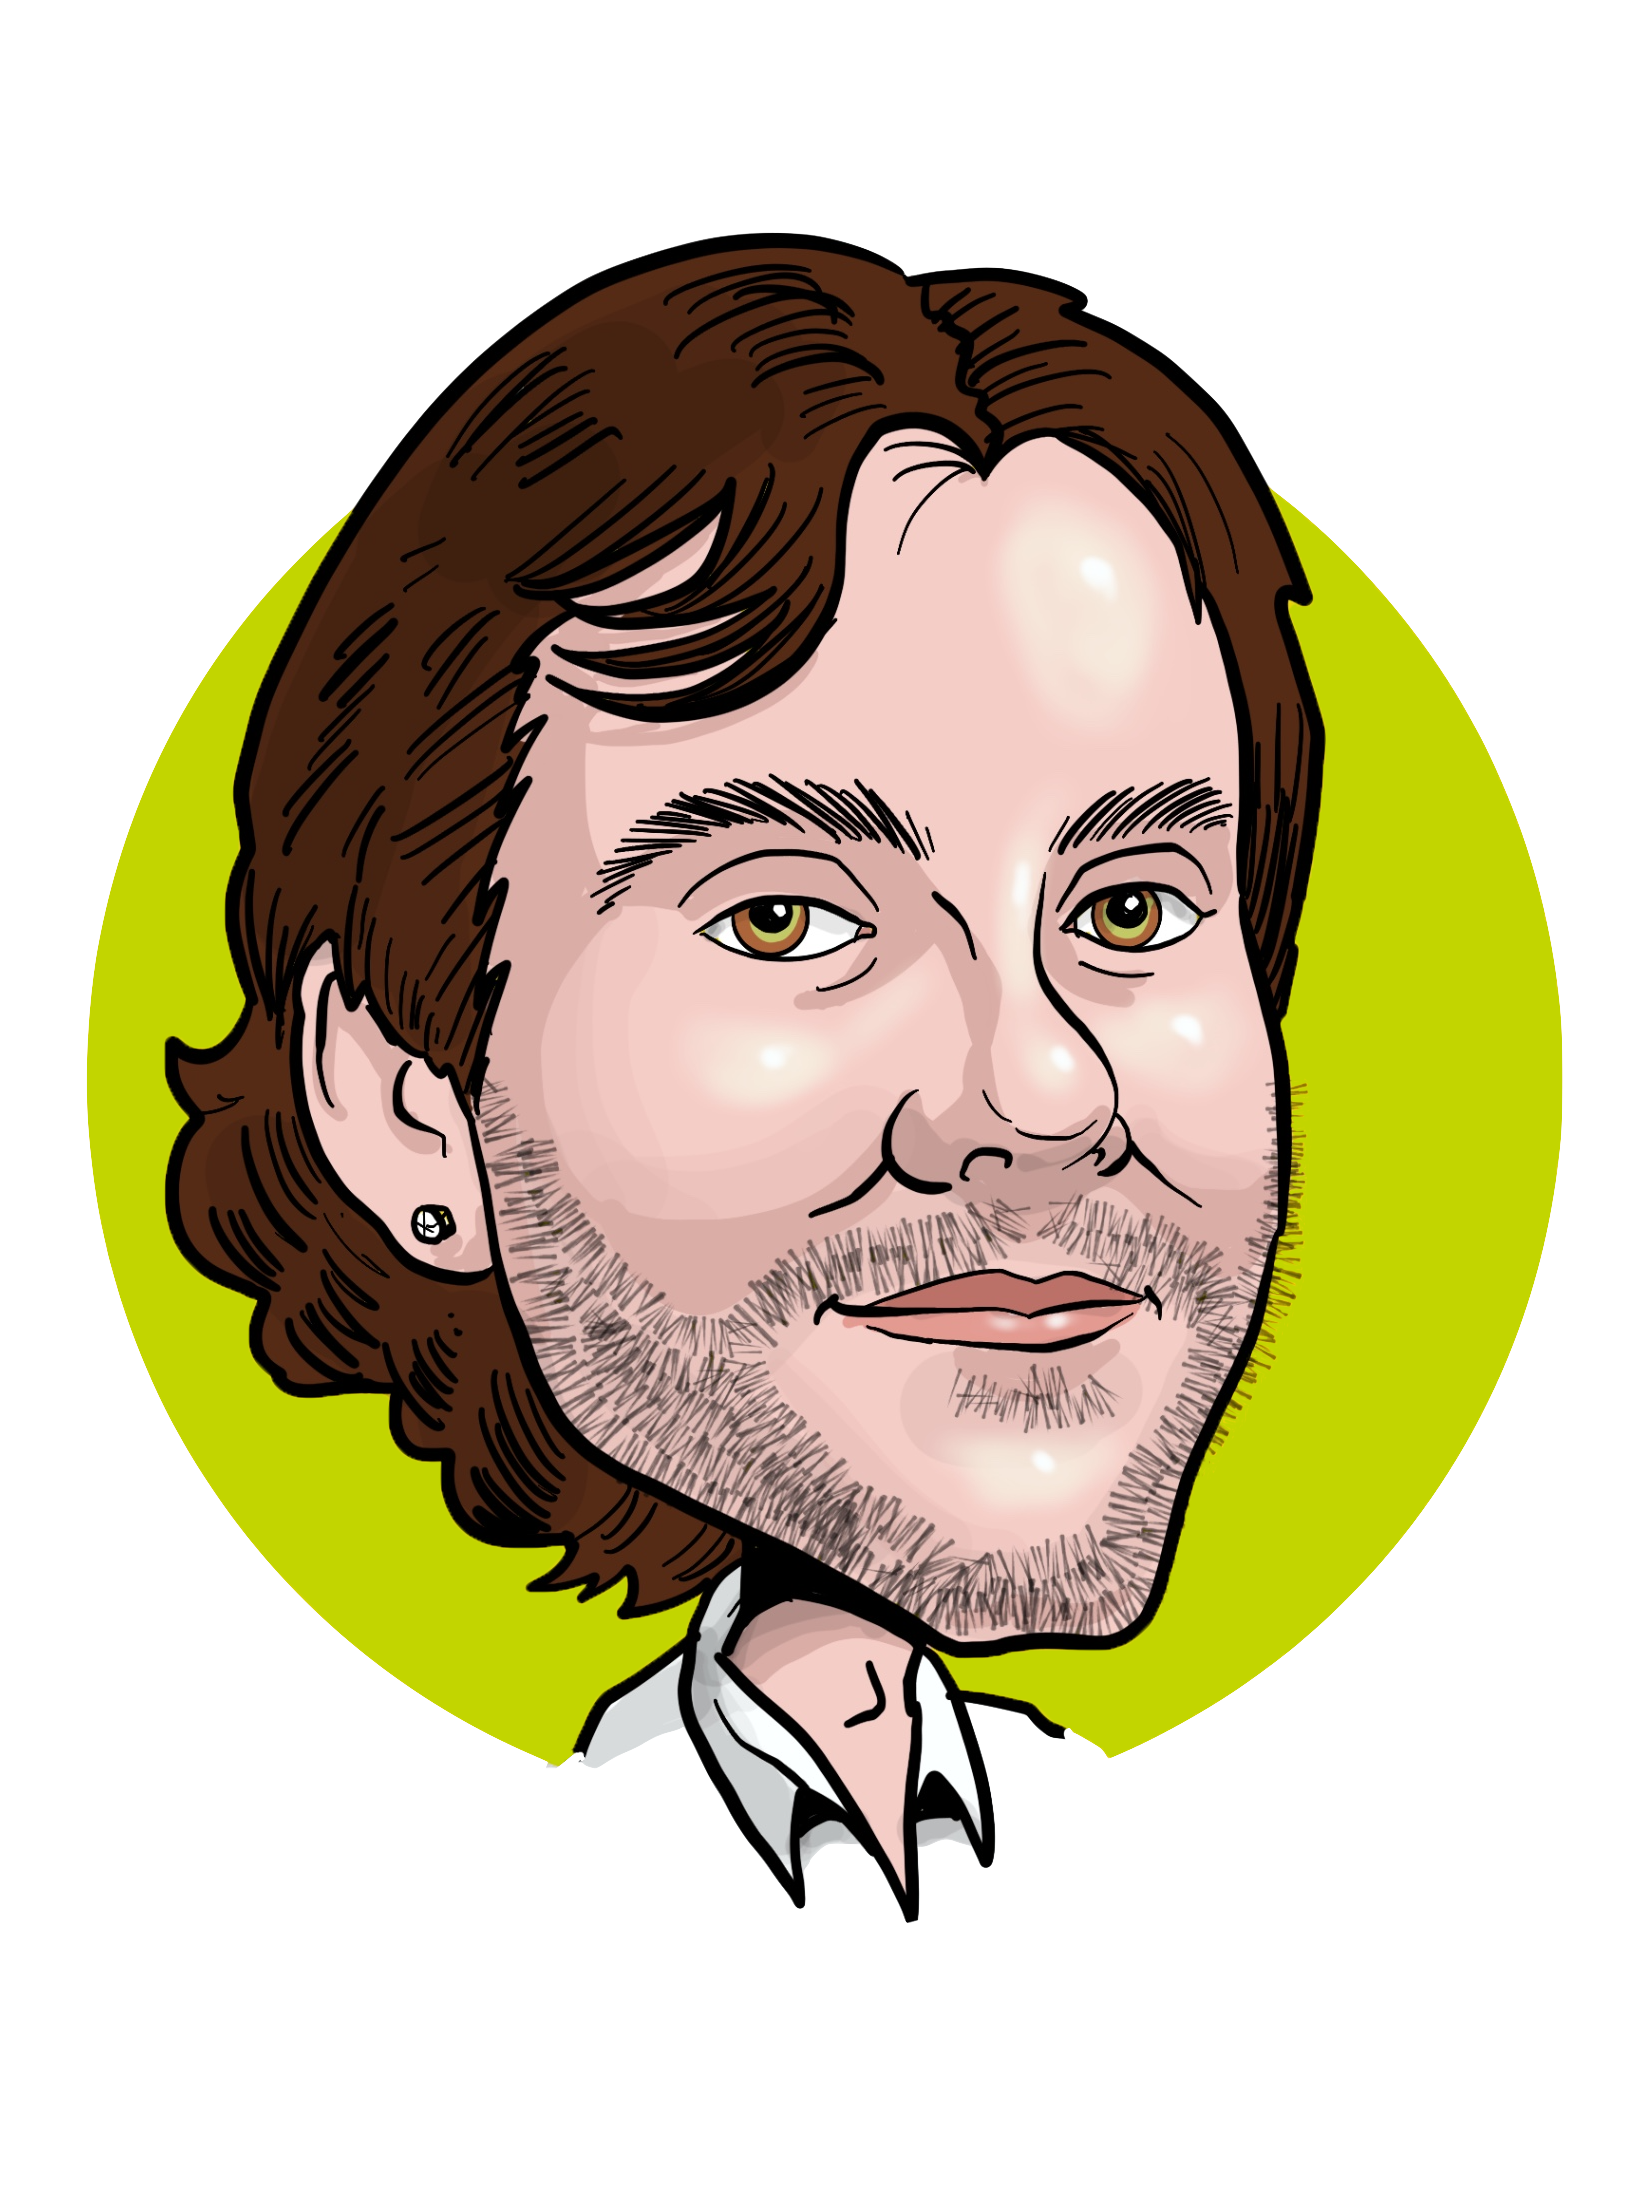 a caricature-style drawing of Jared Parsons' headshot